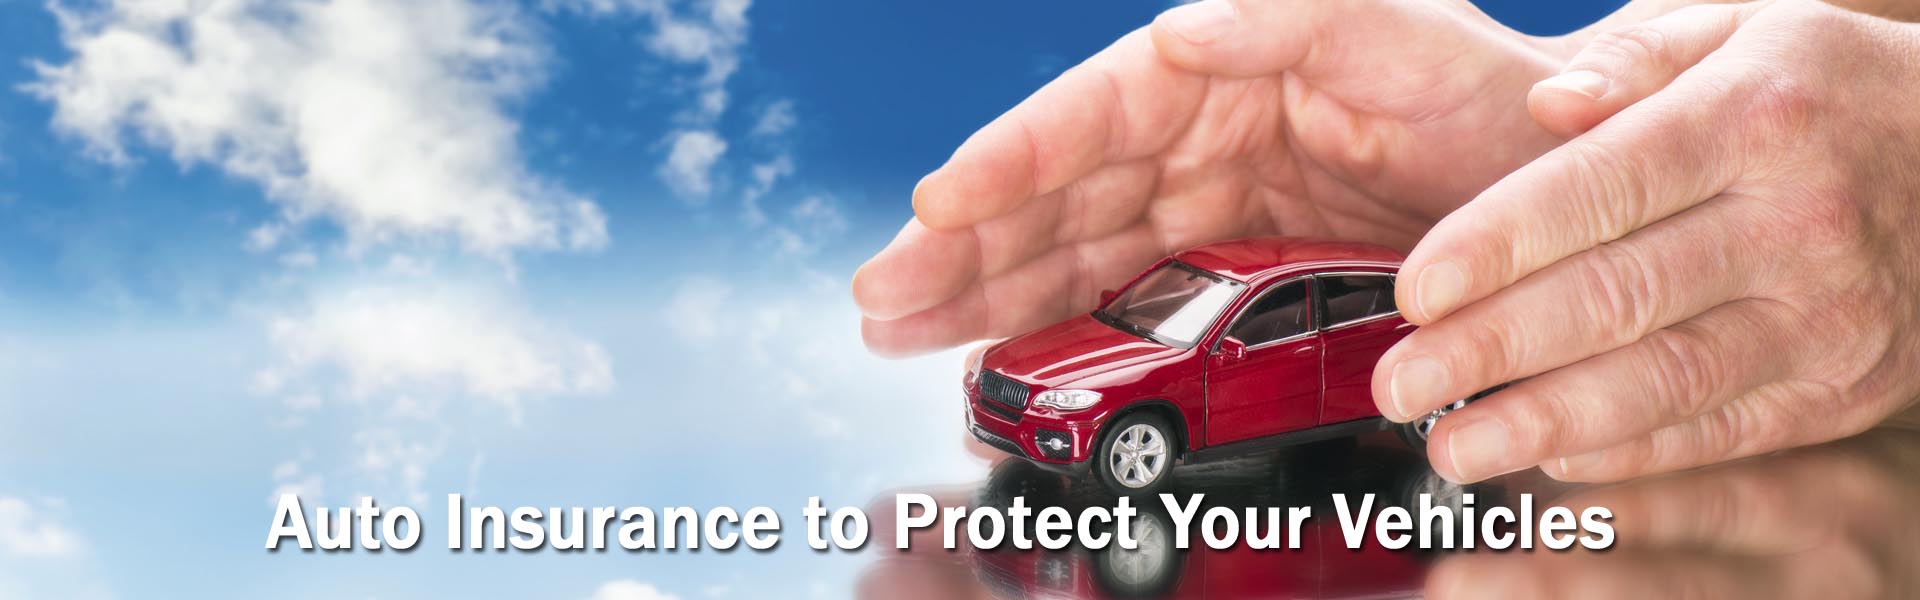 Auto Insurance to Protect Your Vehicles